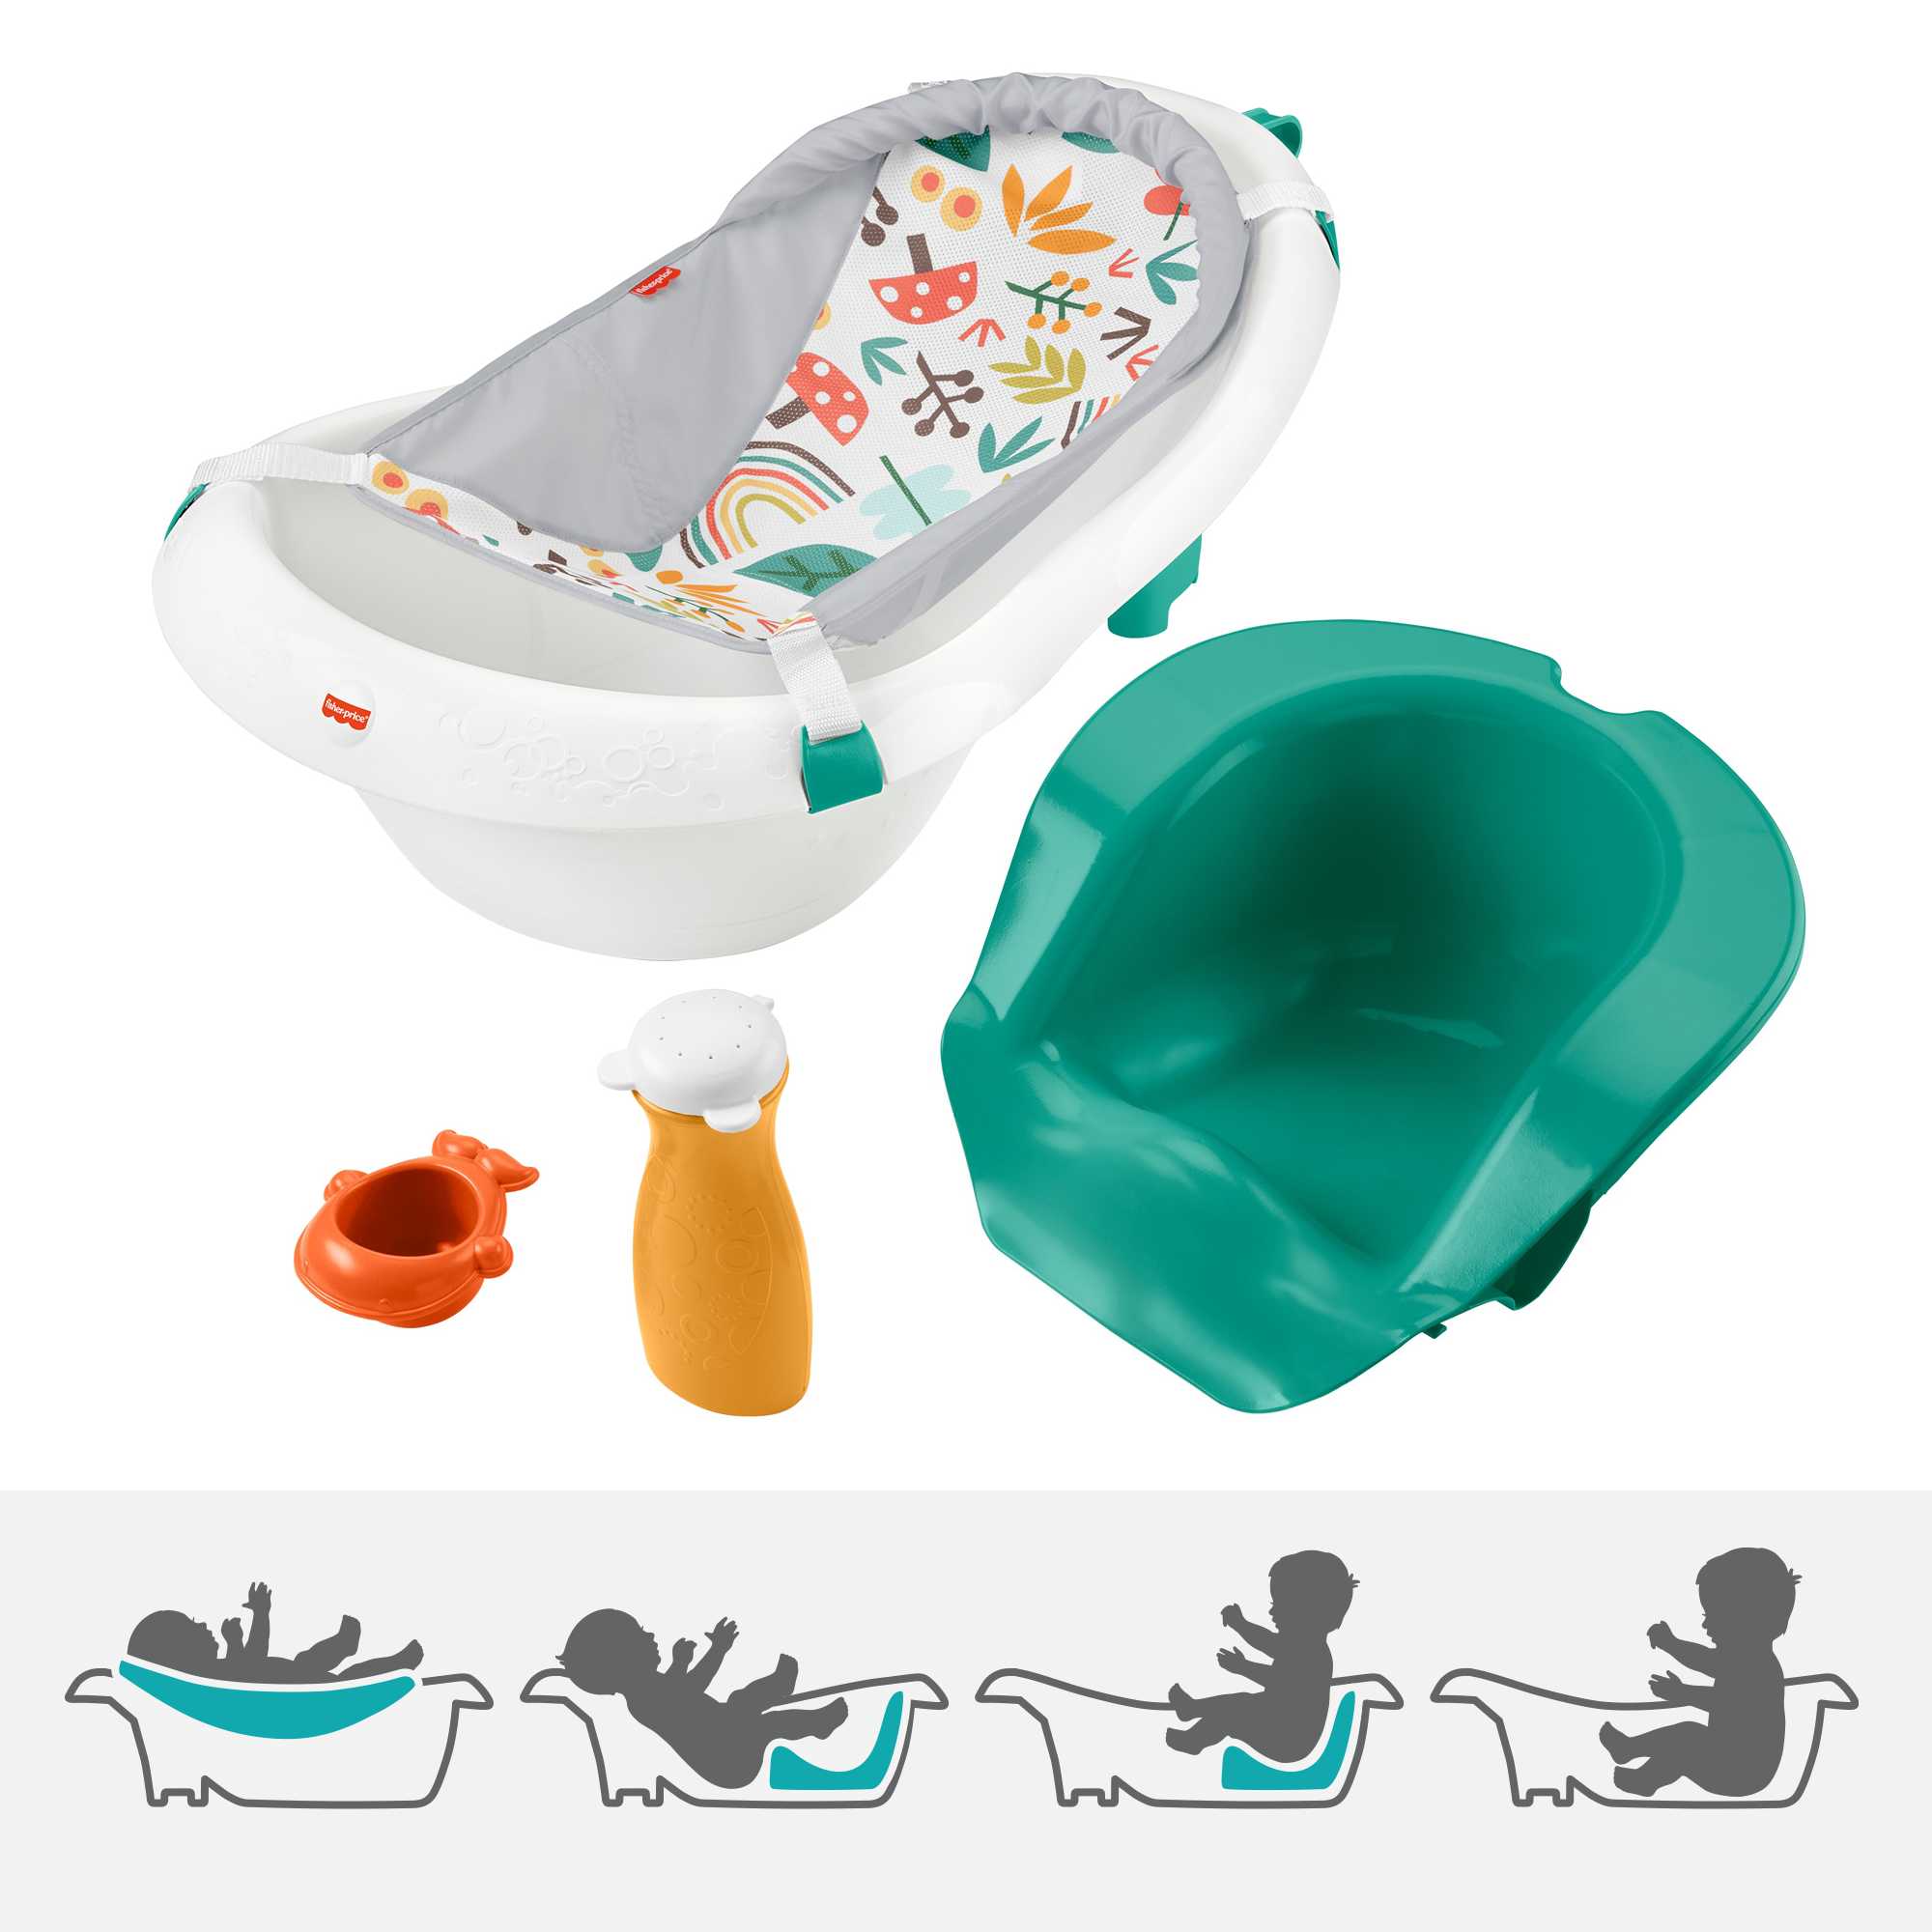 Fisher Price 4-in-1 Baby Bath Tub Whimsical Forest | Mattel